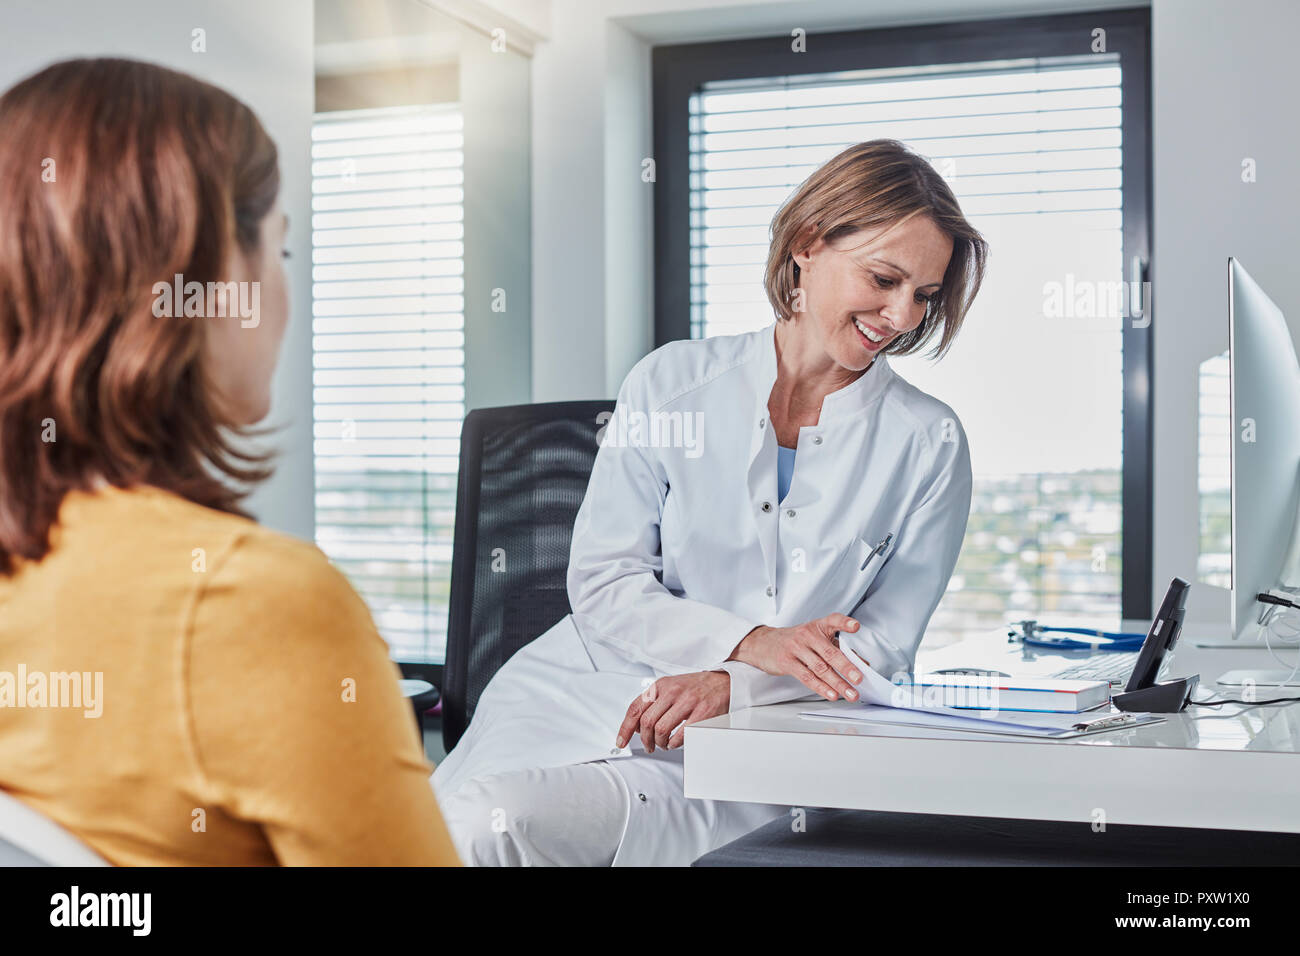 Physician patient talk Stock Photo